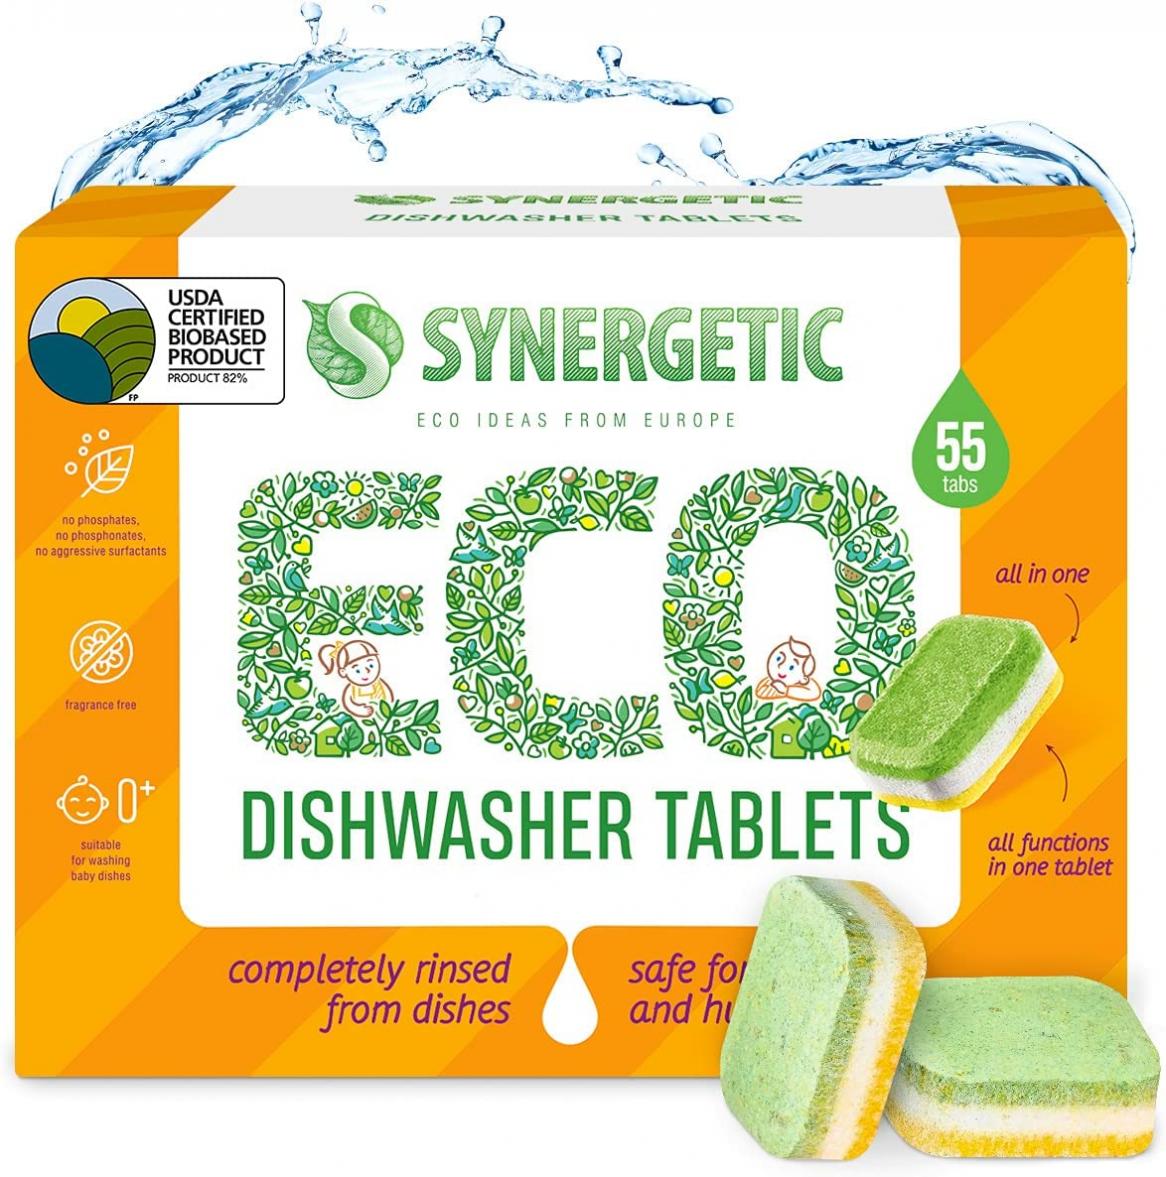 Synergetic Natural Dishwasher Detergent Tablets | Powerful and Safe Dishwasher Pods made from Plant-based ingredients | 55 Tablets